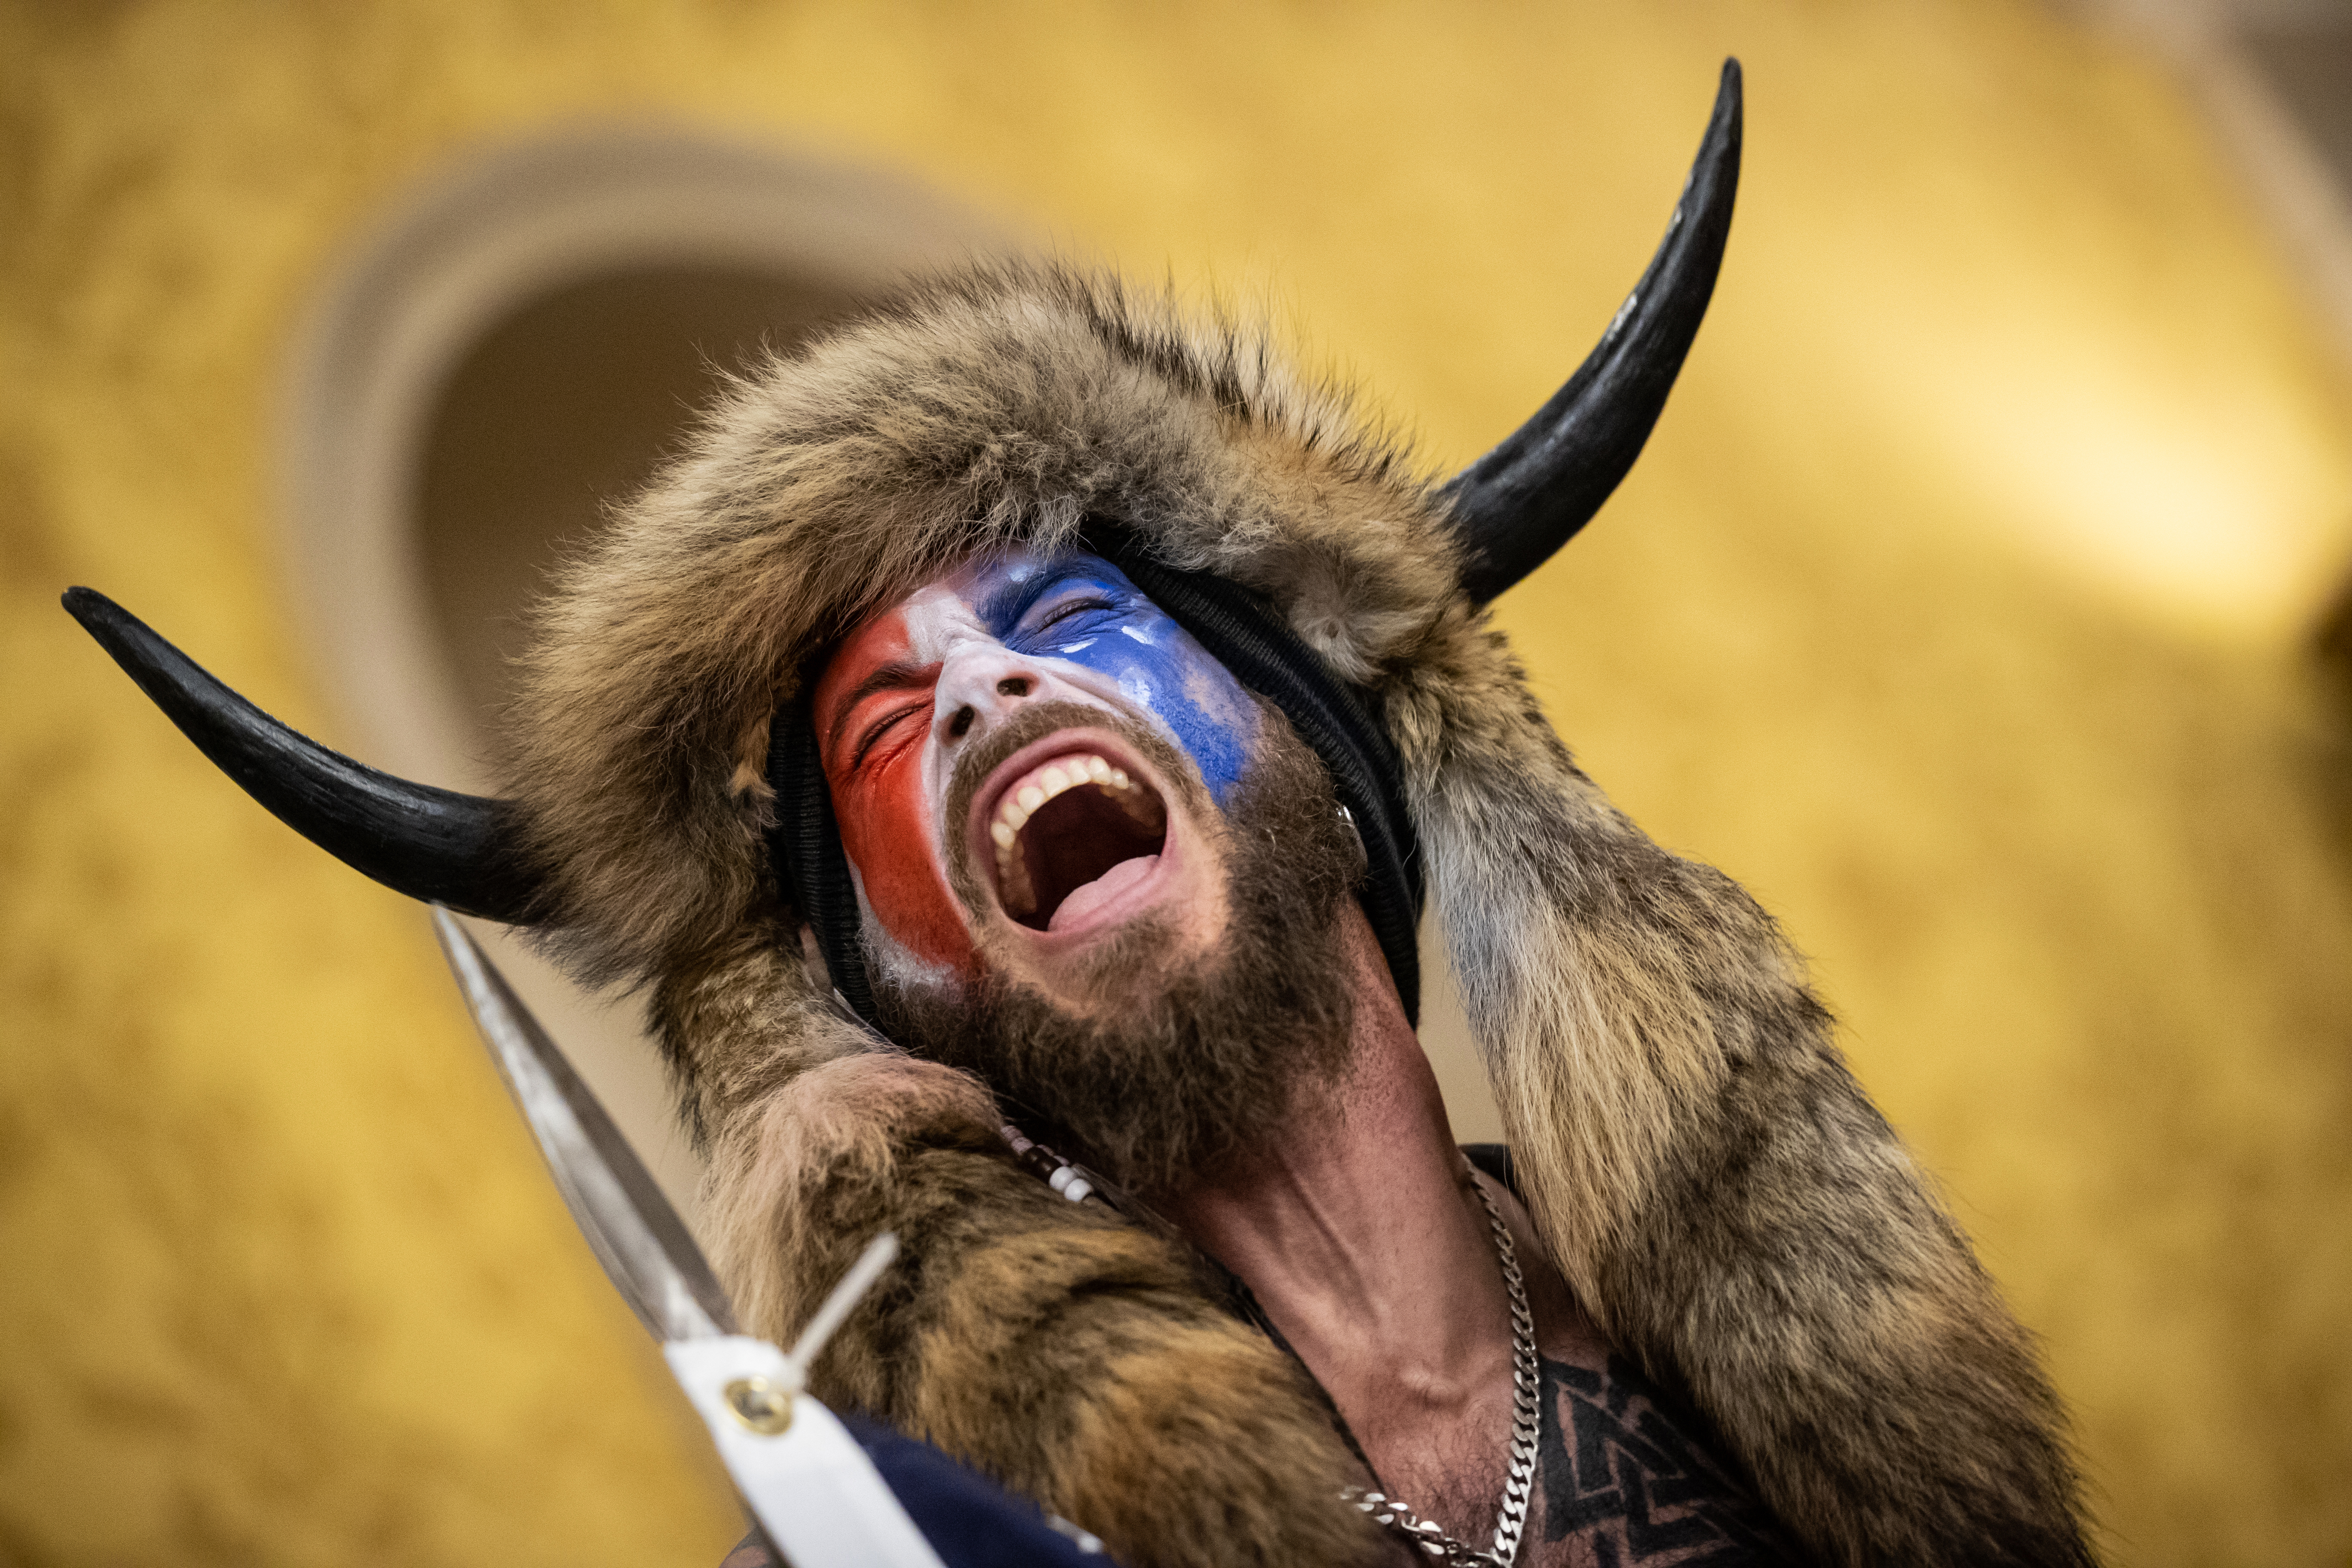 A bearded man in red, white, and blue face paint and wearing a furred and horned hat has his mouth open in a scream.